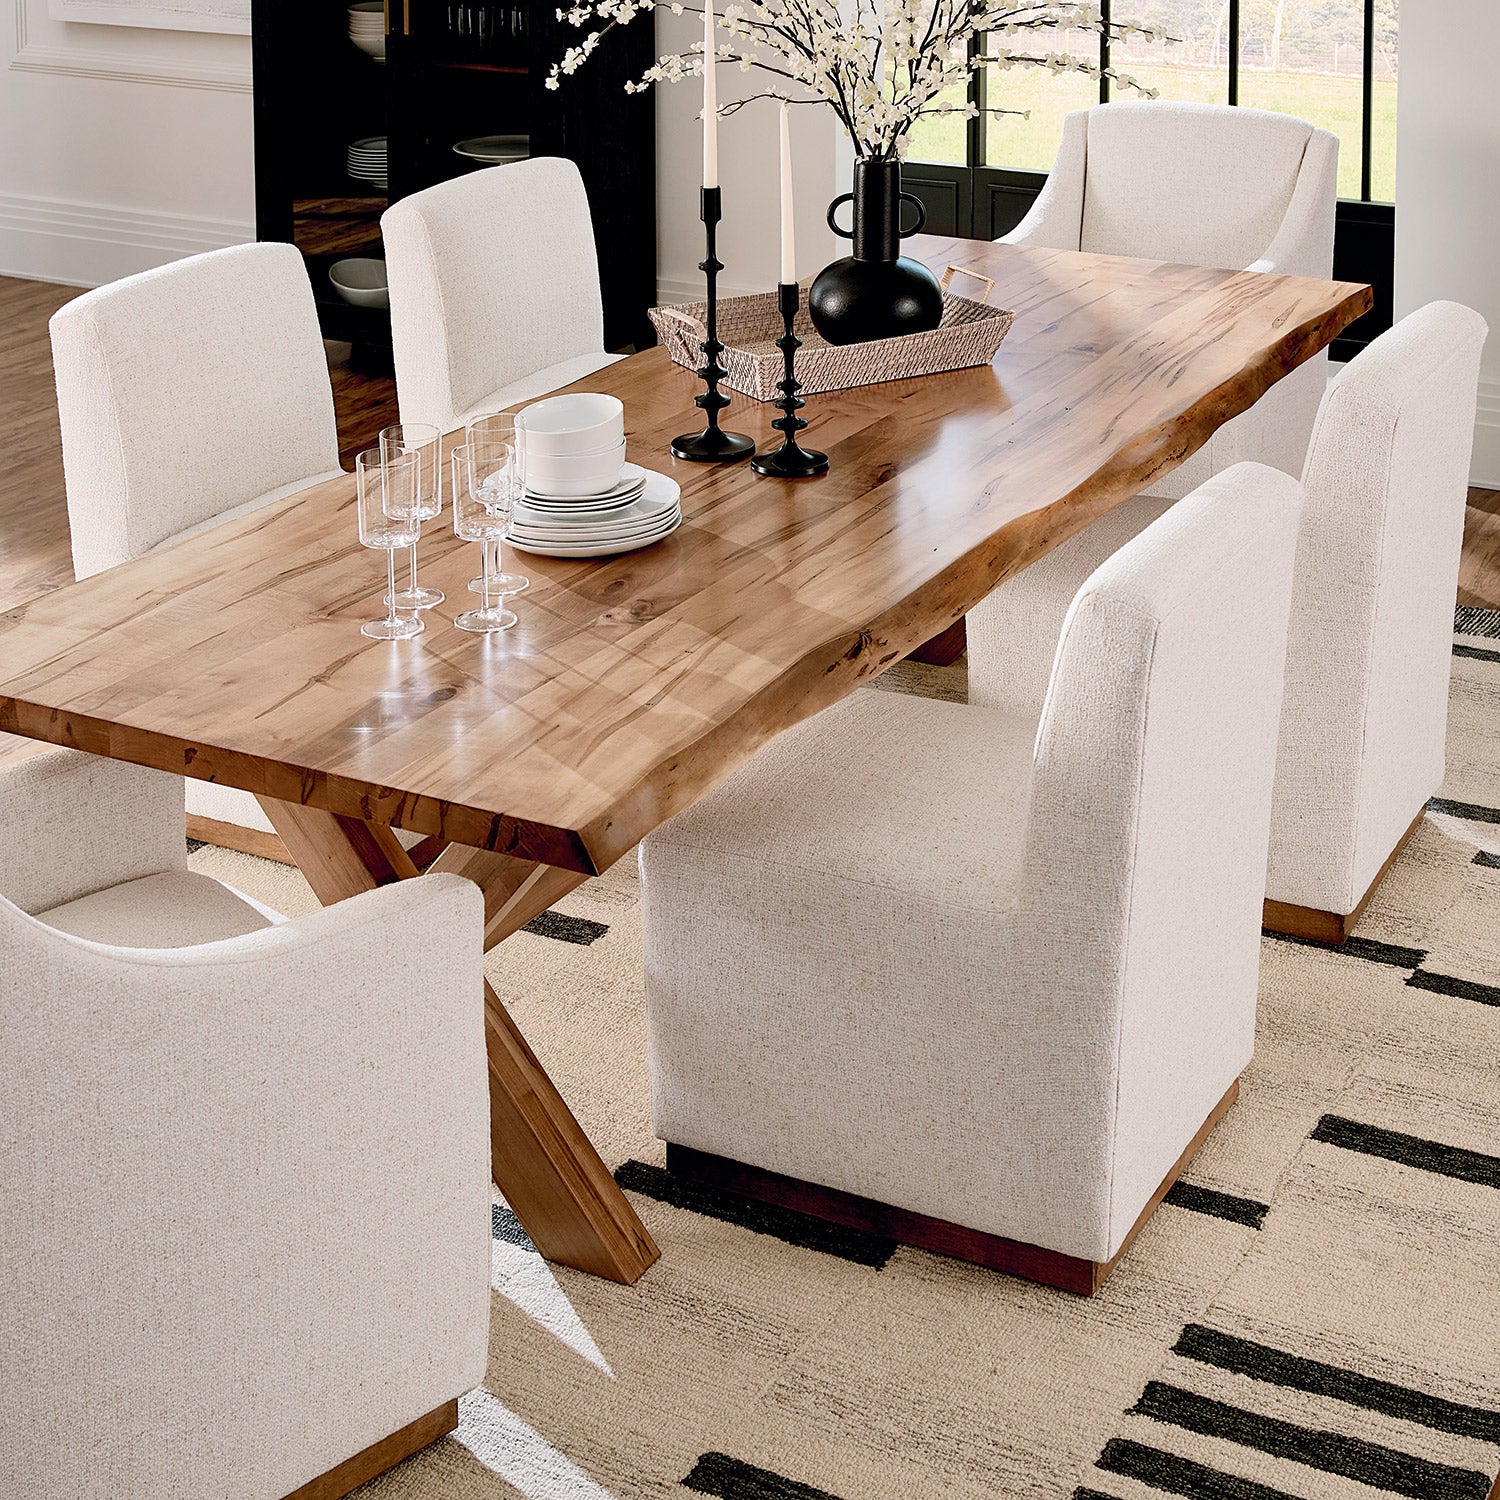 Crossbuck Maple Dining Table